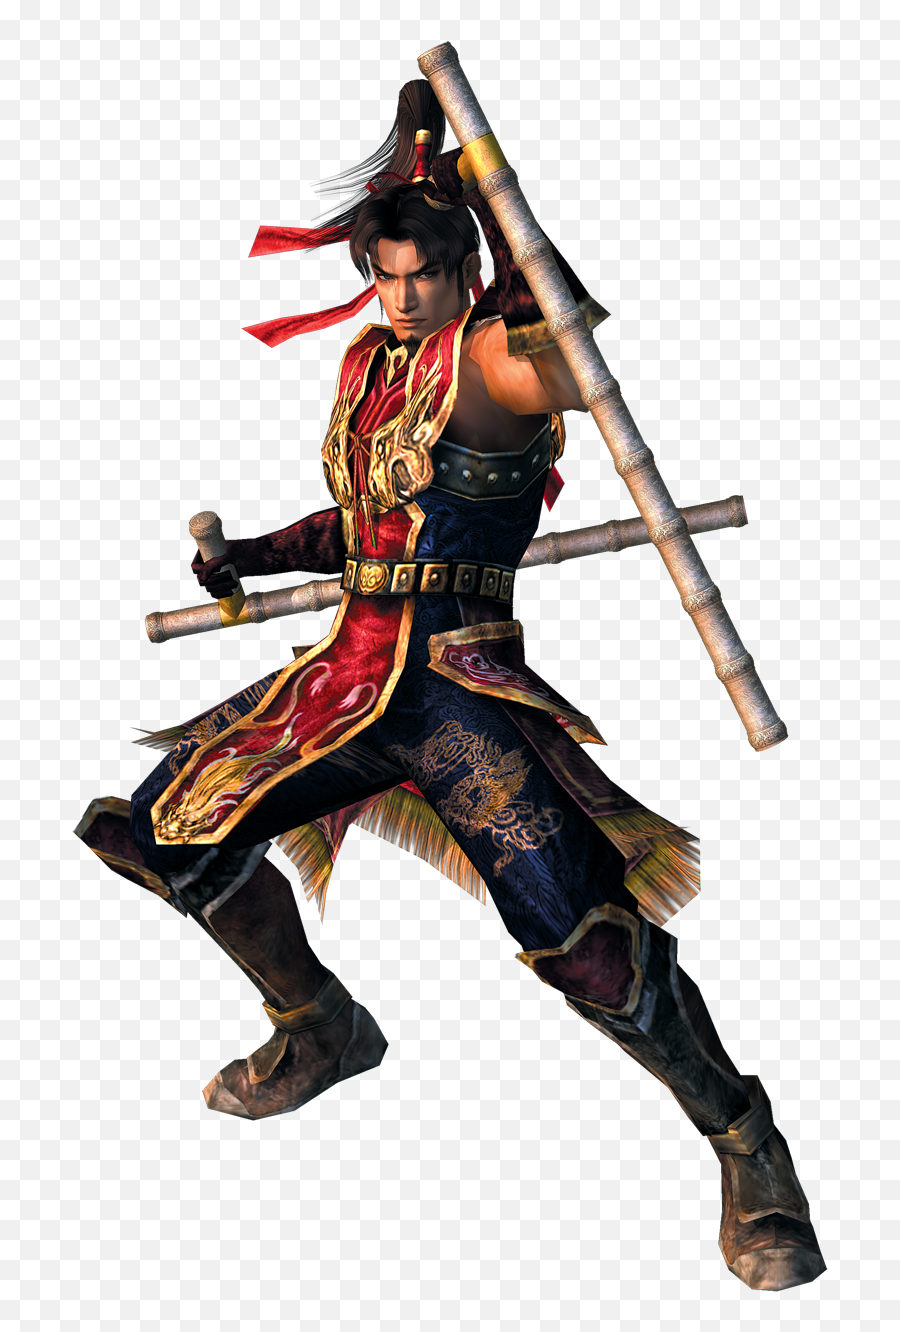 Dynasty Warriors Png Image Background - Dynasty Warriors Sun Ce,Warrior Transparent Background